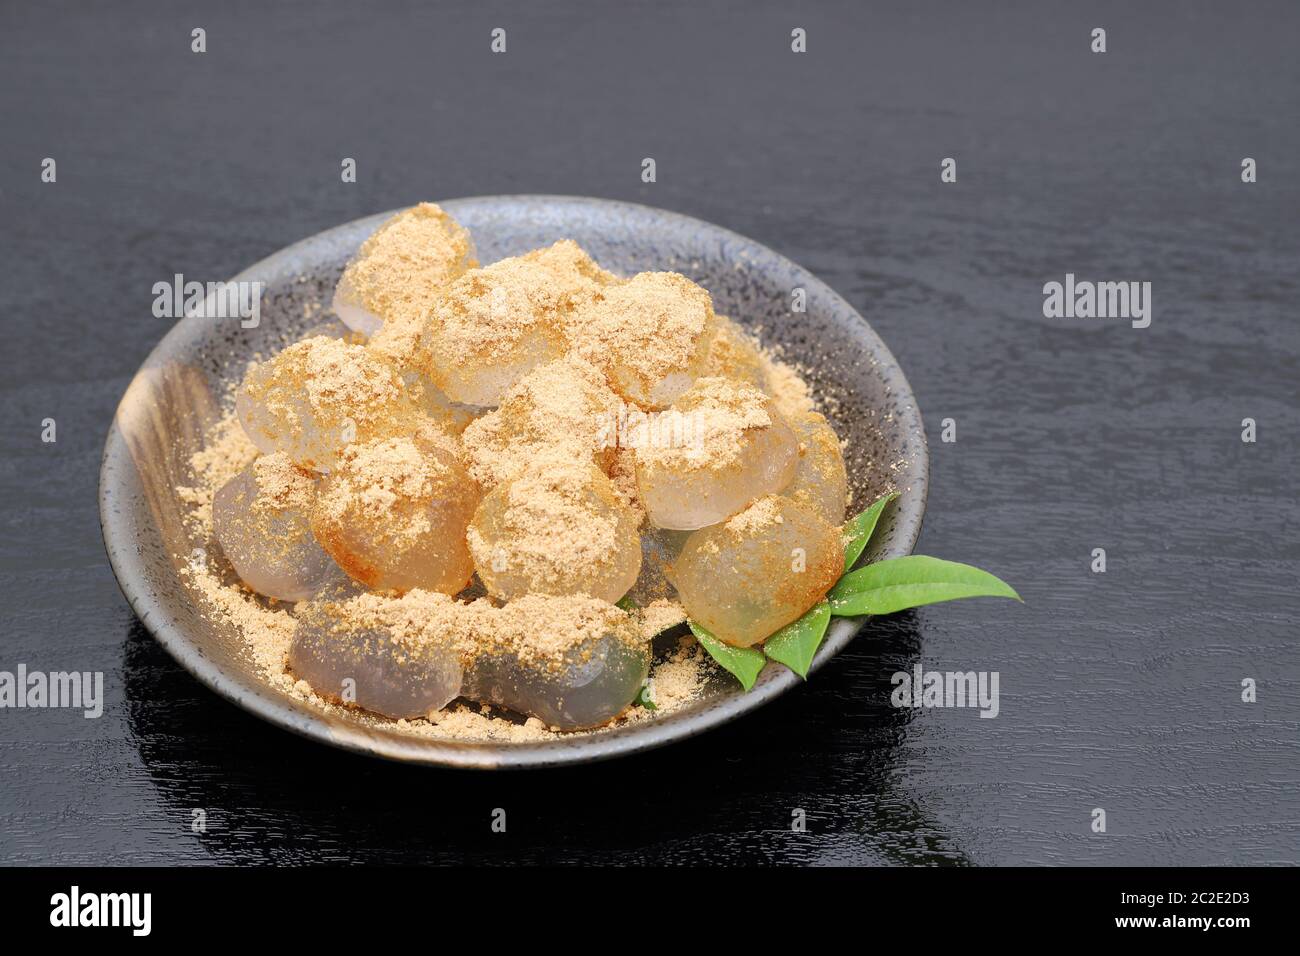 Perle di Sole sweets with Japanese sign Stock Photo - Alamy